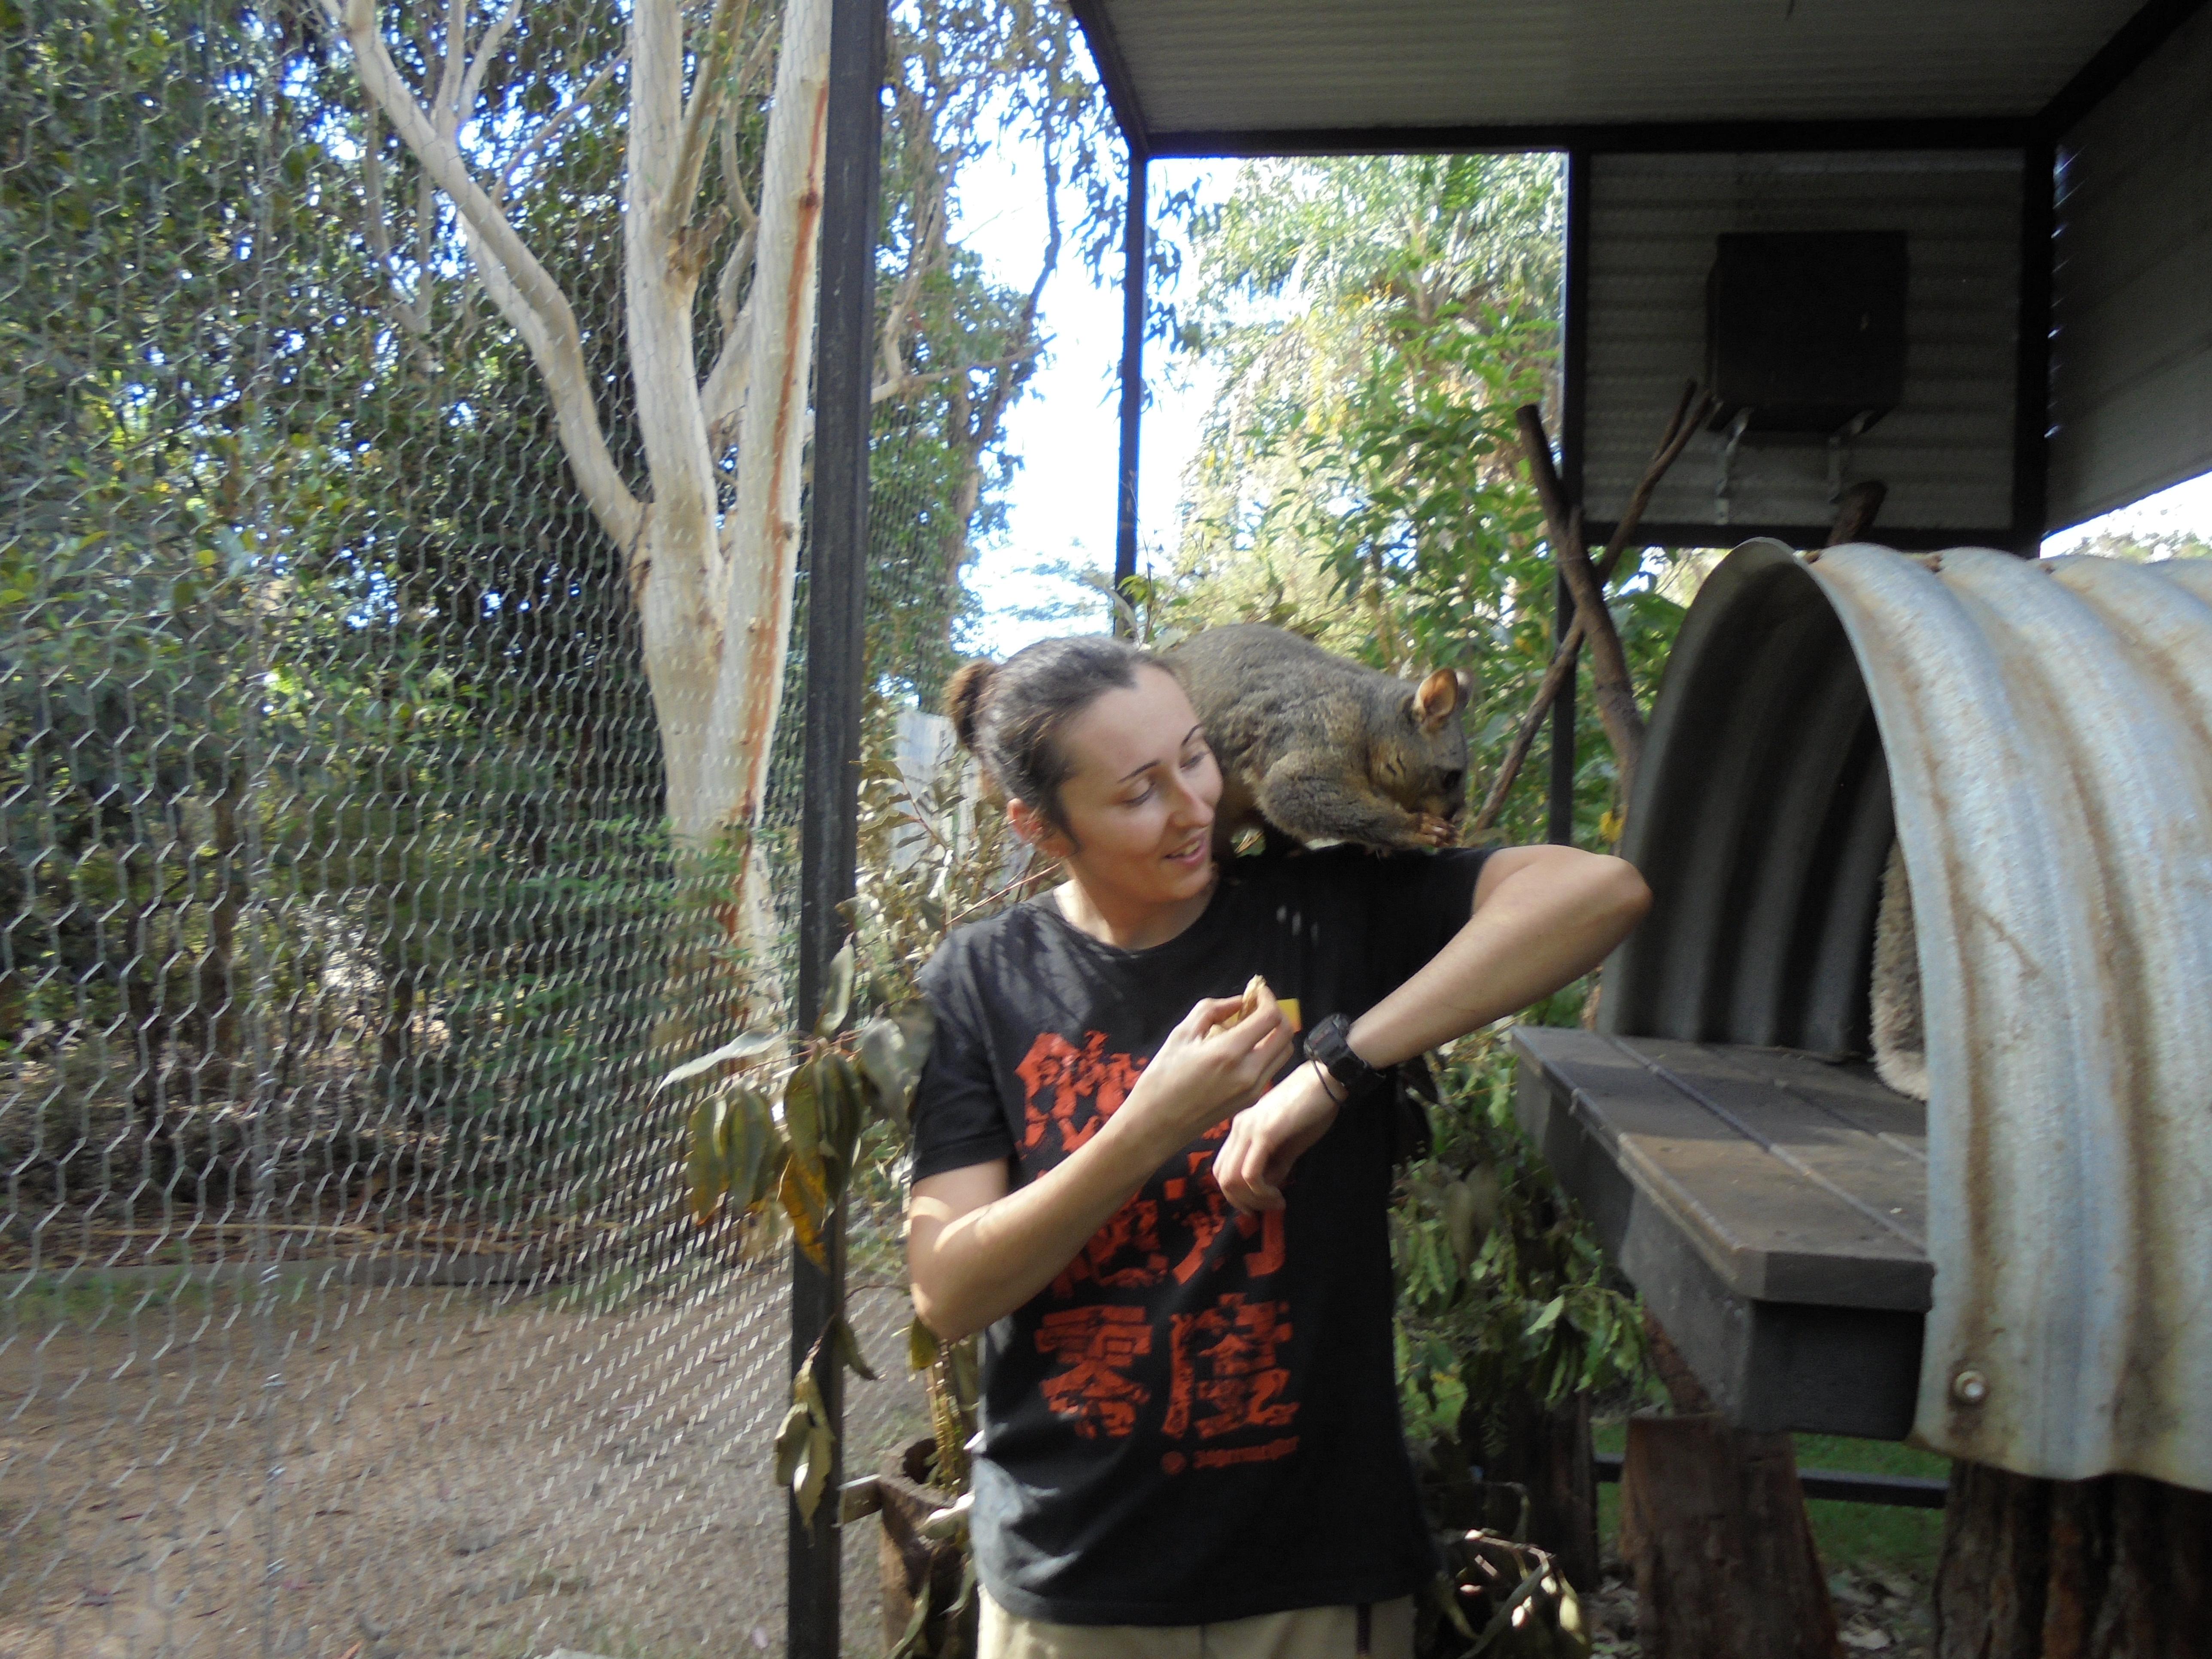 Jade is now working on a permanent basis, after being unemployed for quite some time. She is pictured here working on the job at Potoroo Palace with some native Australian wildlife.